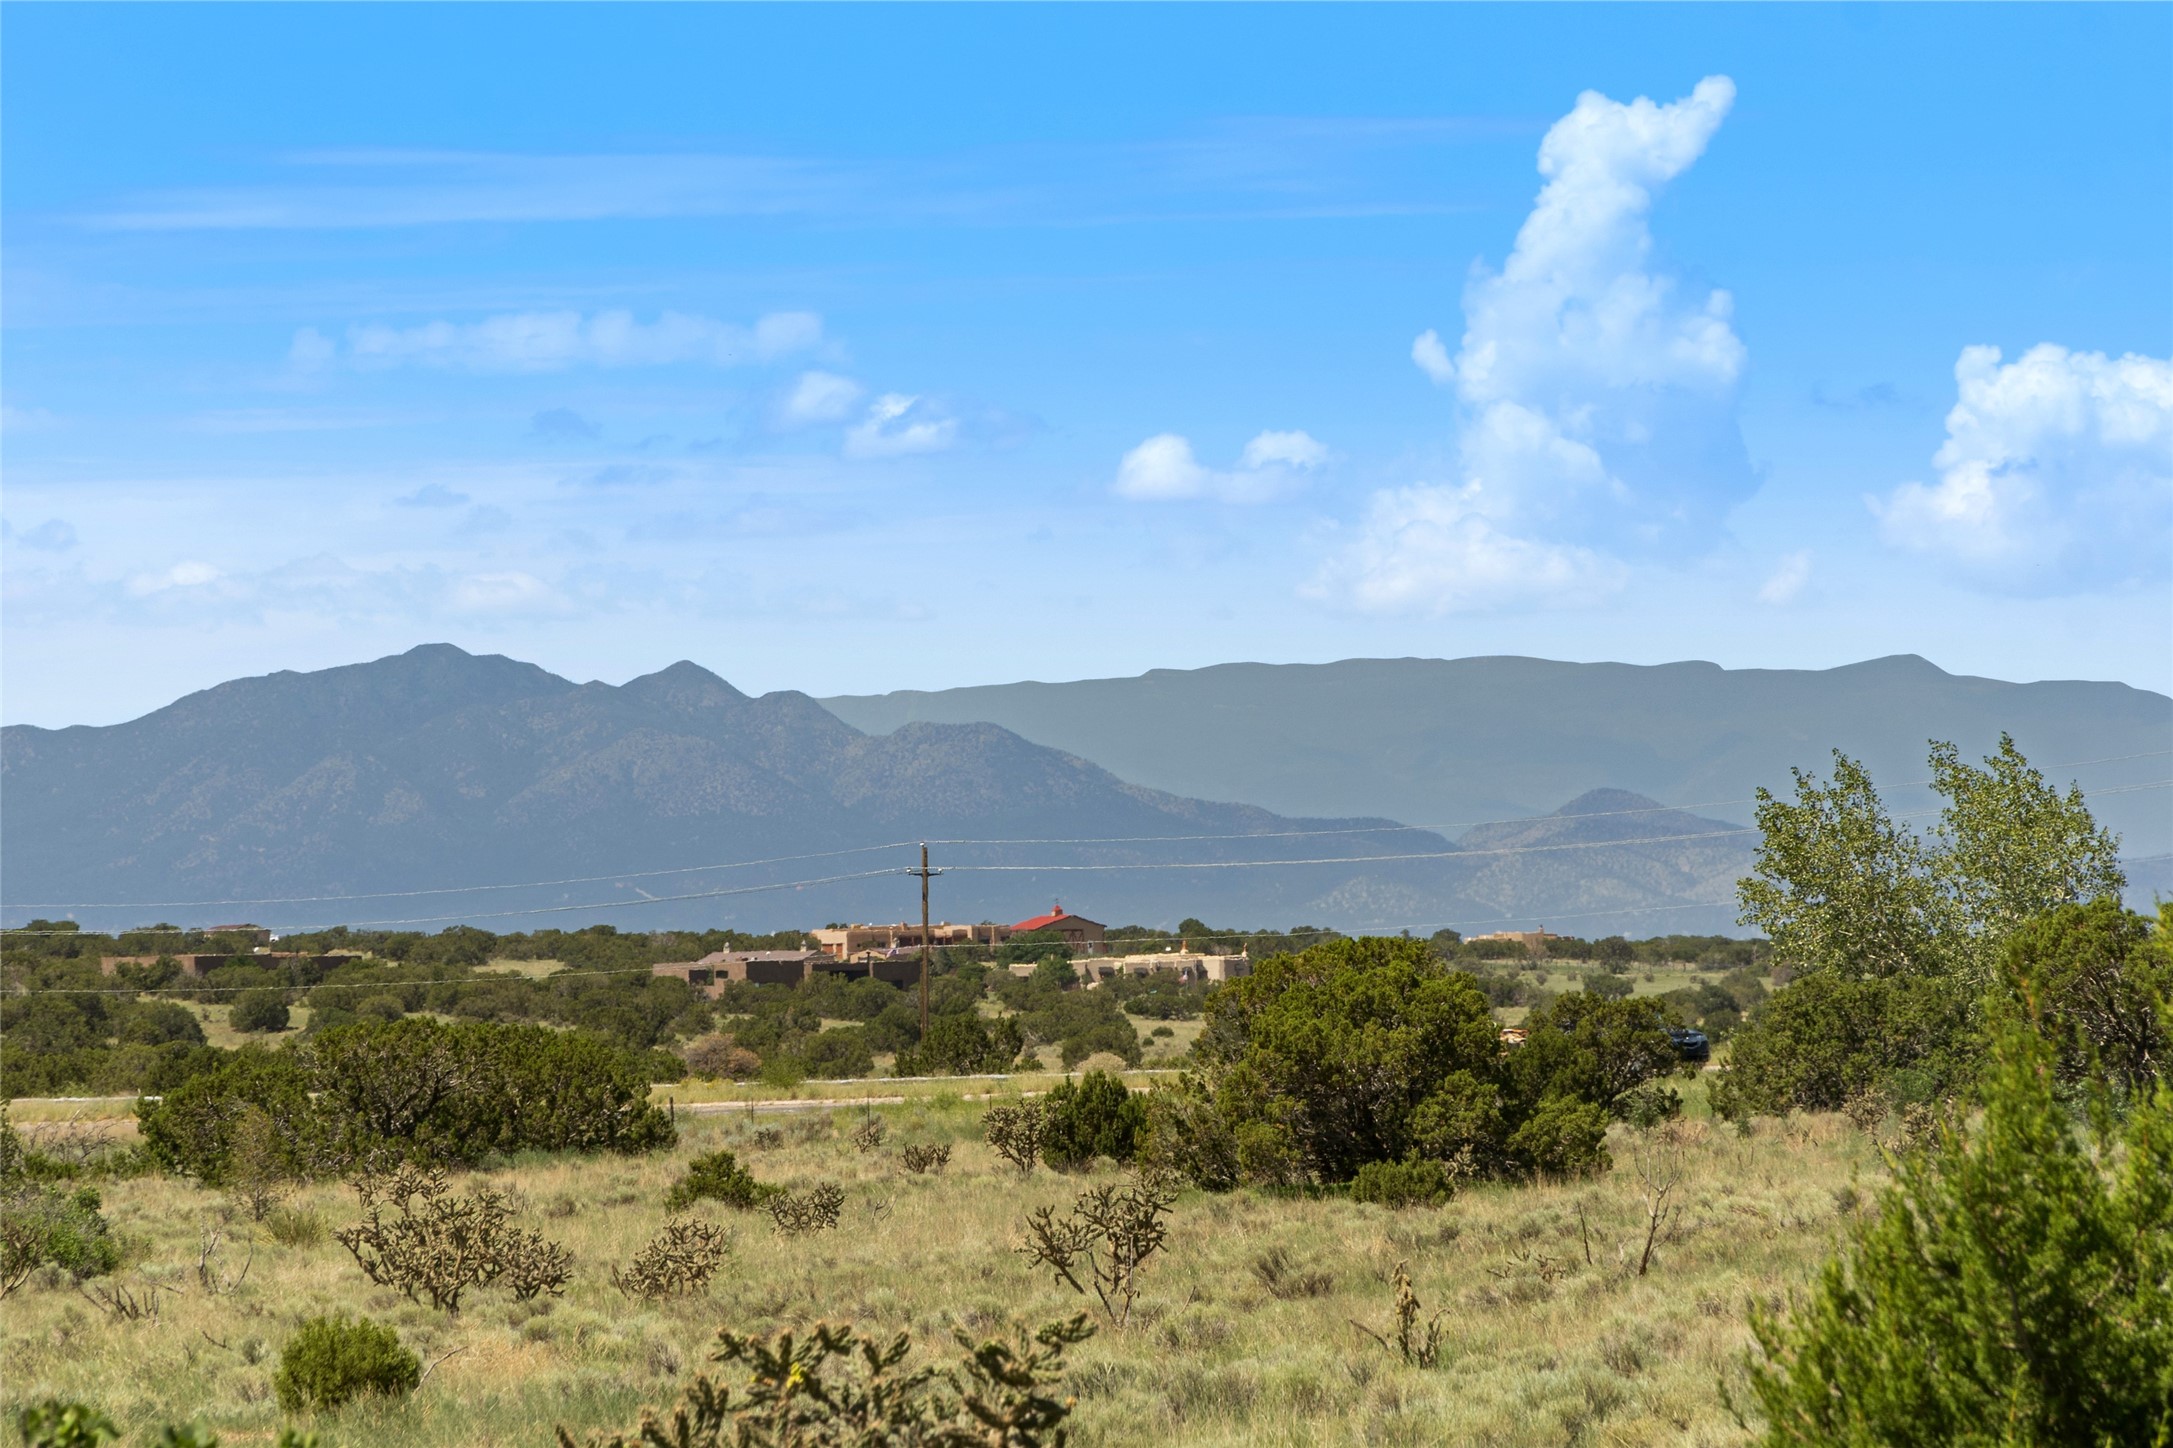 47 Old Road, Lamy, New Mexico 87540, 3 Bedrooms Bedrooms, ,2 BathroomsBathrooms,Residential,For Sale,47 Old Road,202232273